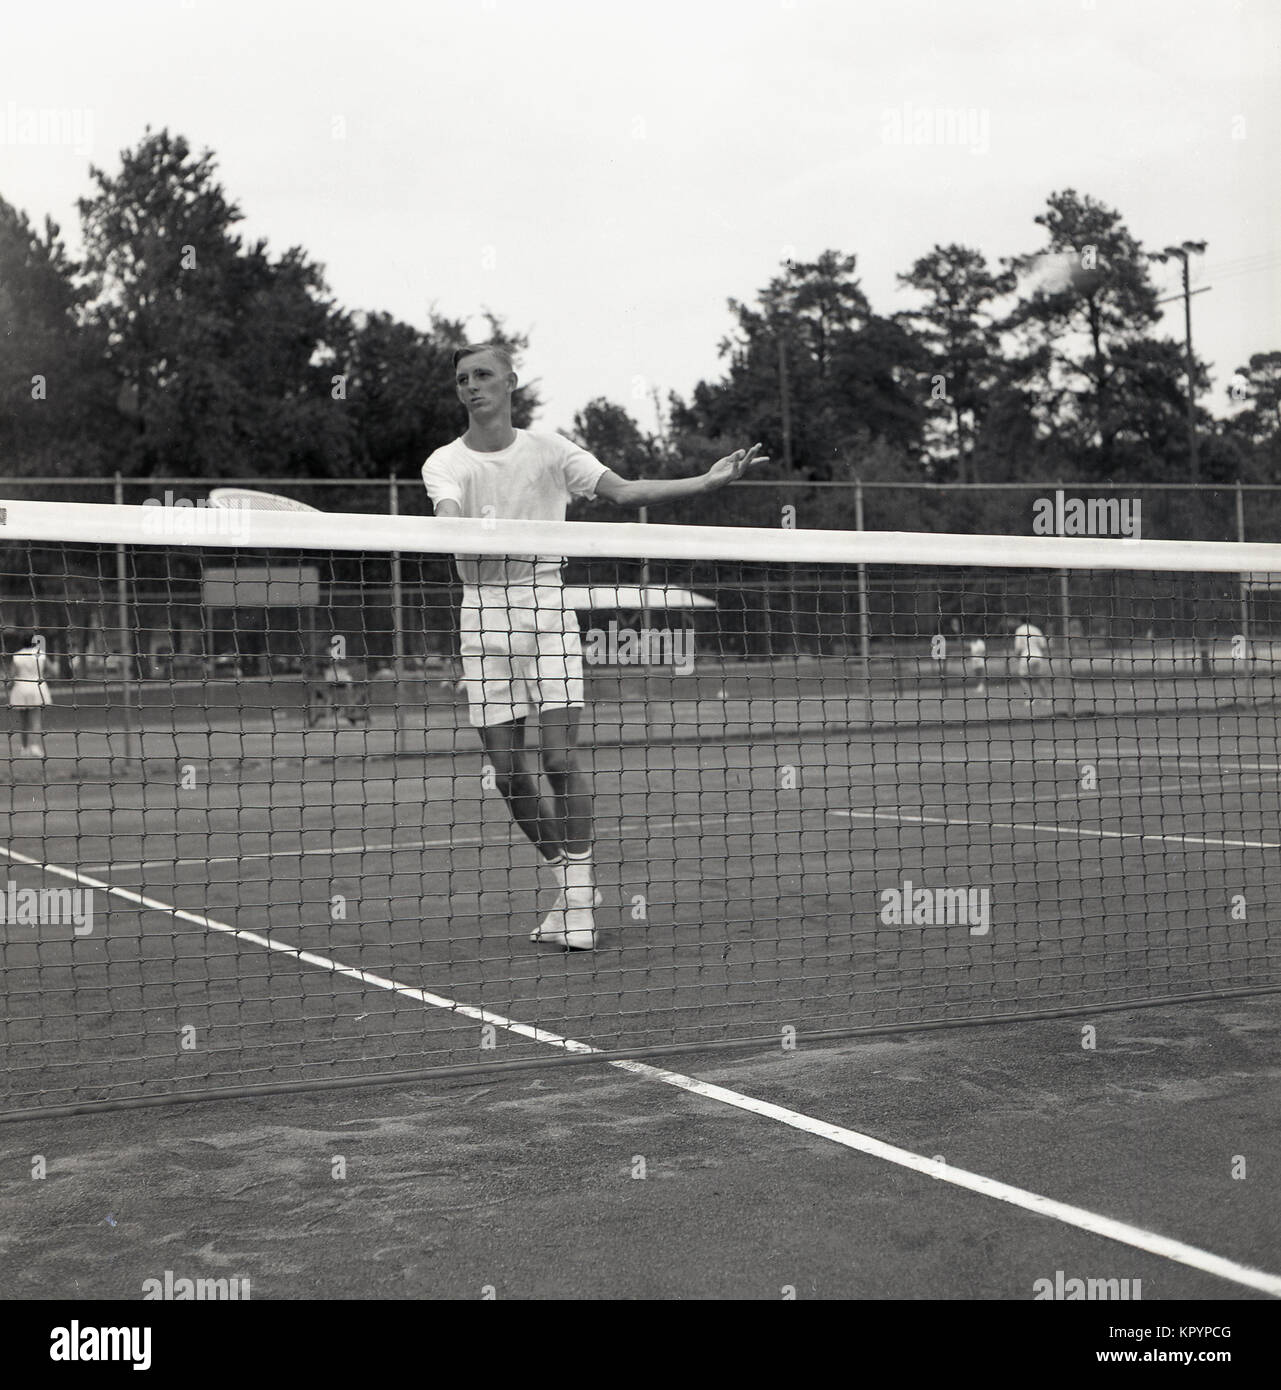 1960s, historical, outdoor clay court, a clean-cut young adult male tennis player by the net practising his volleying technique, USA. Stock Photo